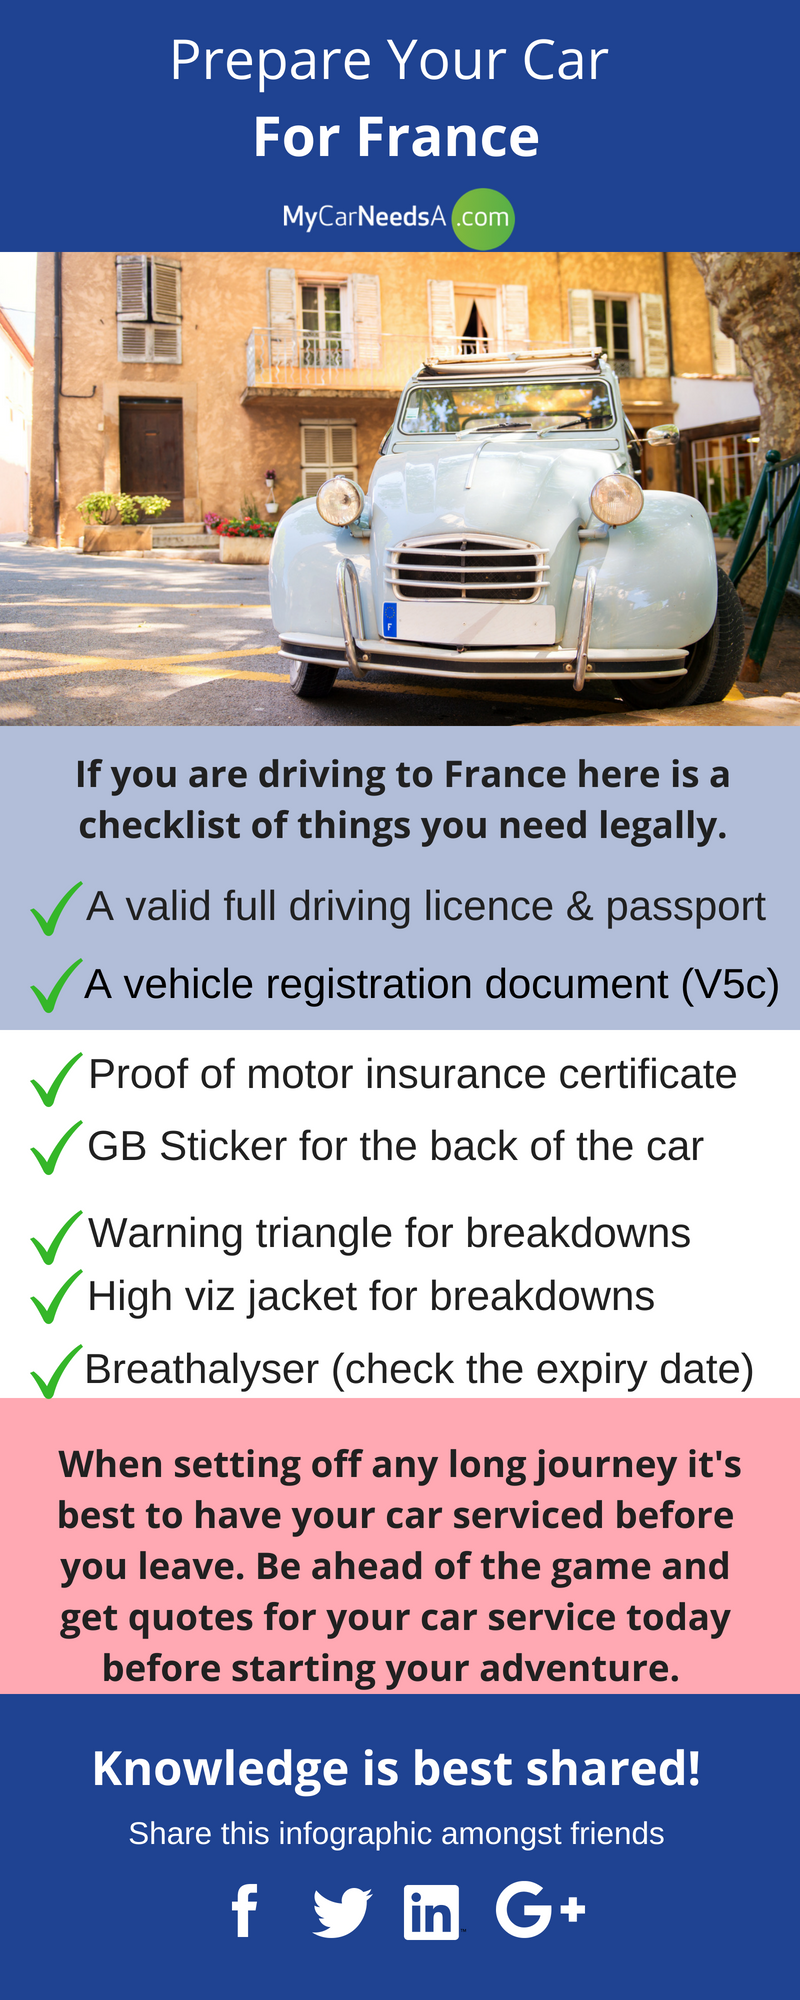 Prepare your car for France 